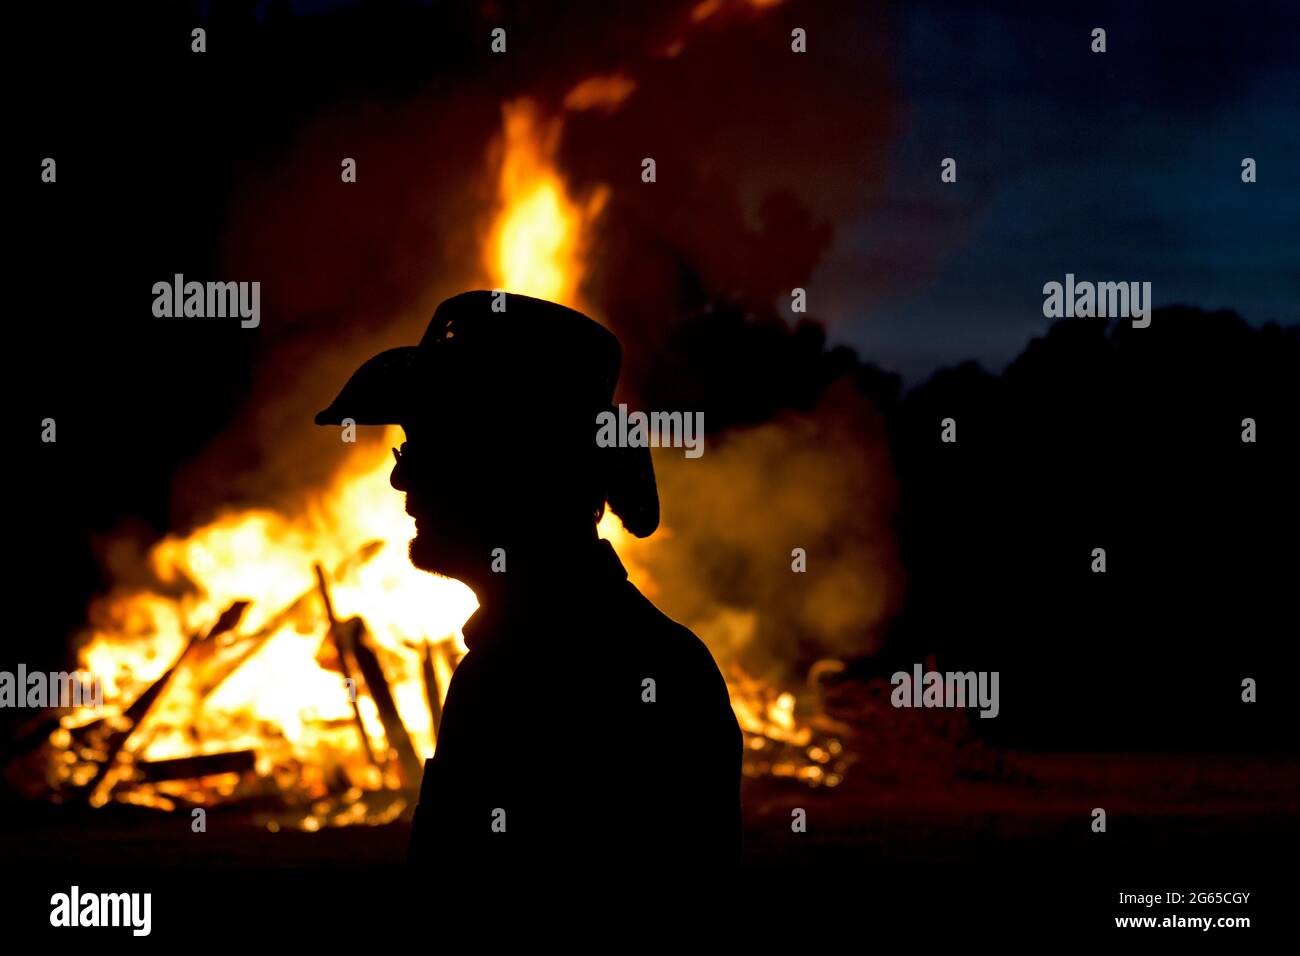 A fire burns behind the silhouette of a man. Stock Photo